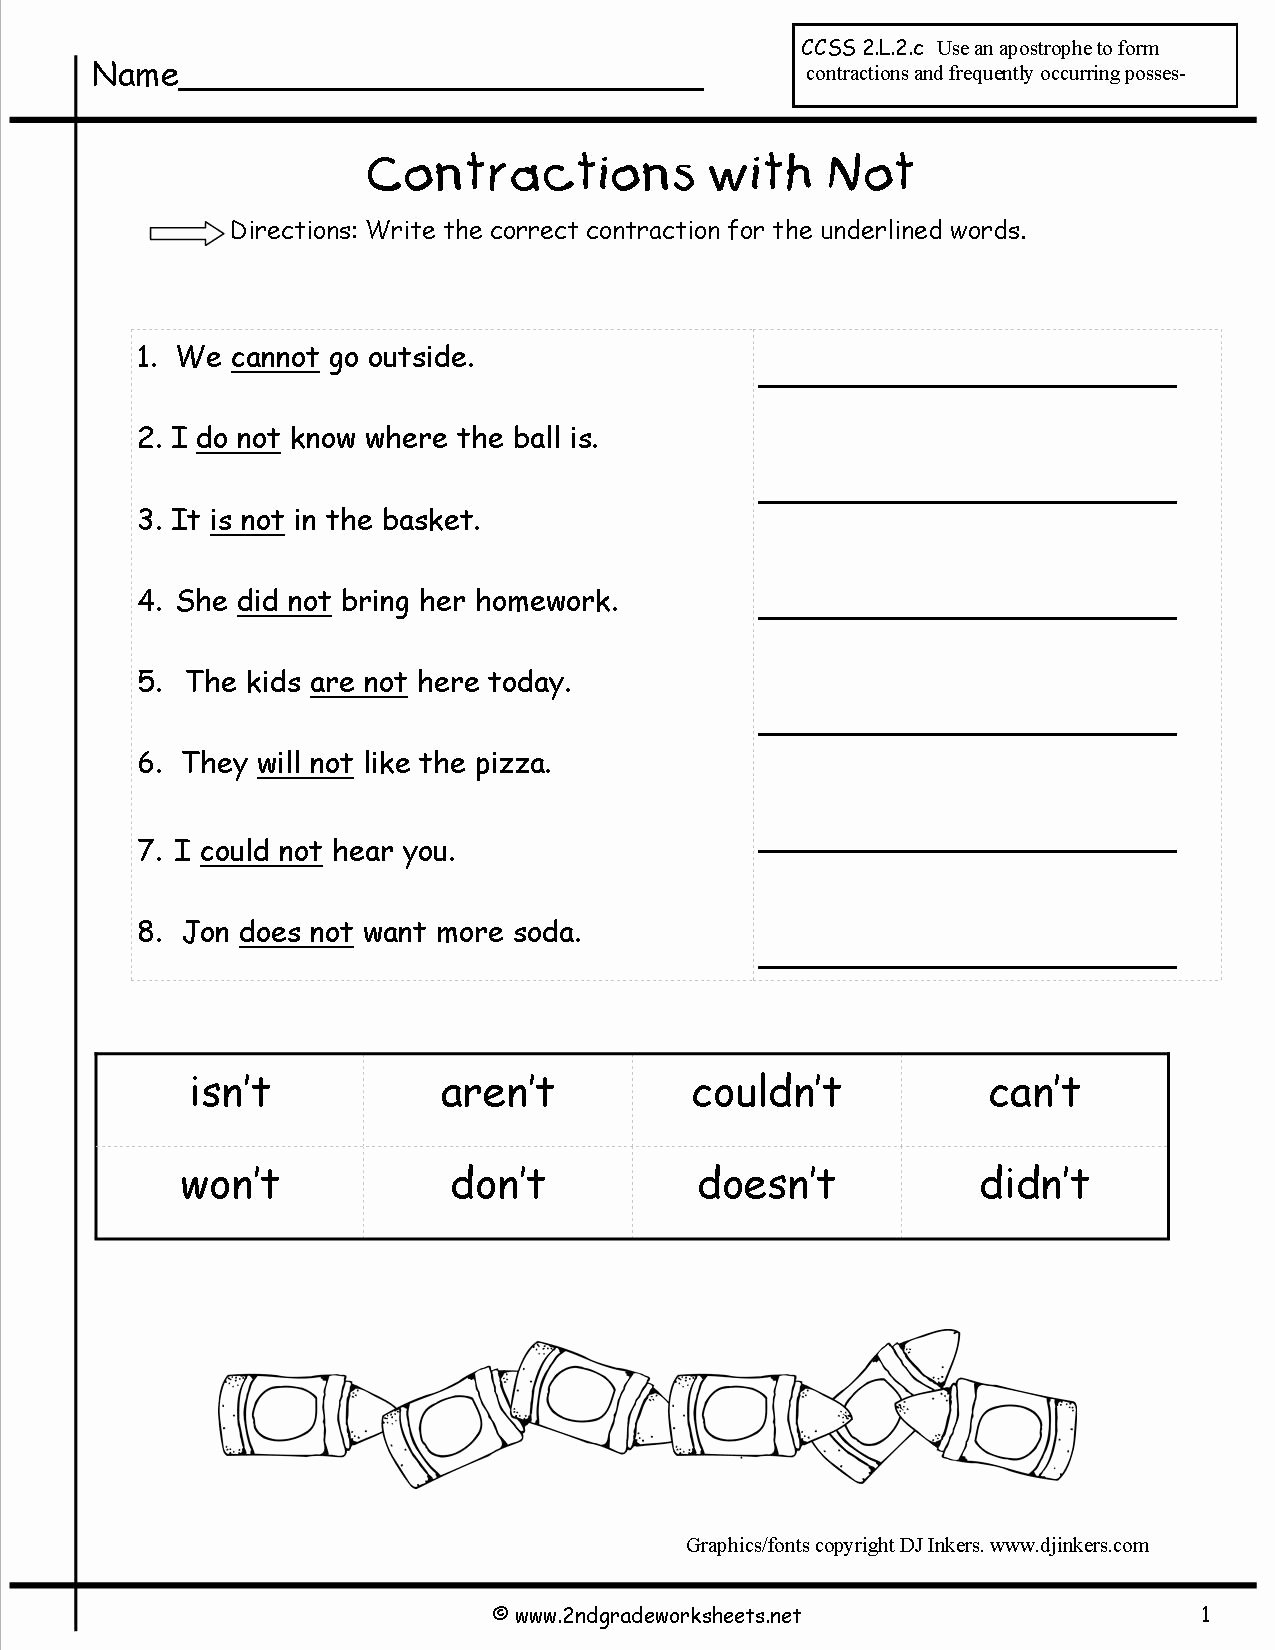 Contractions Worksheet 2nd Grade Lovely Free Contractions Worksheets and Printouts